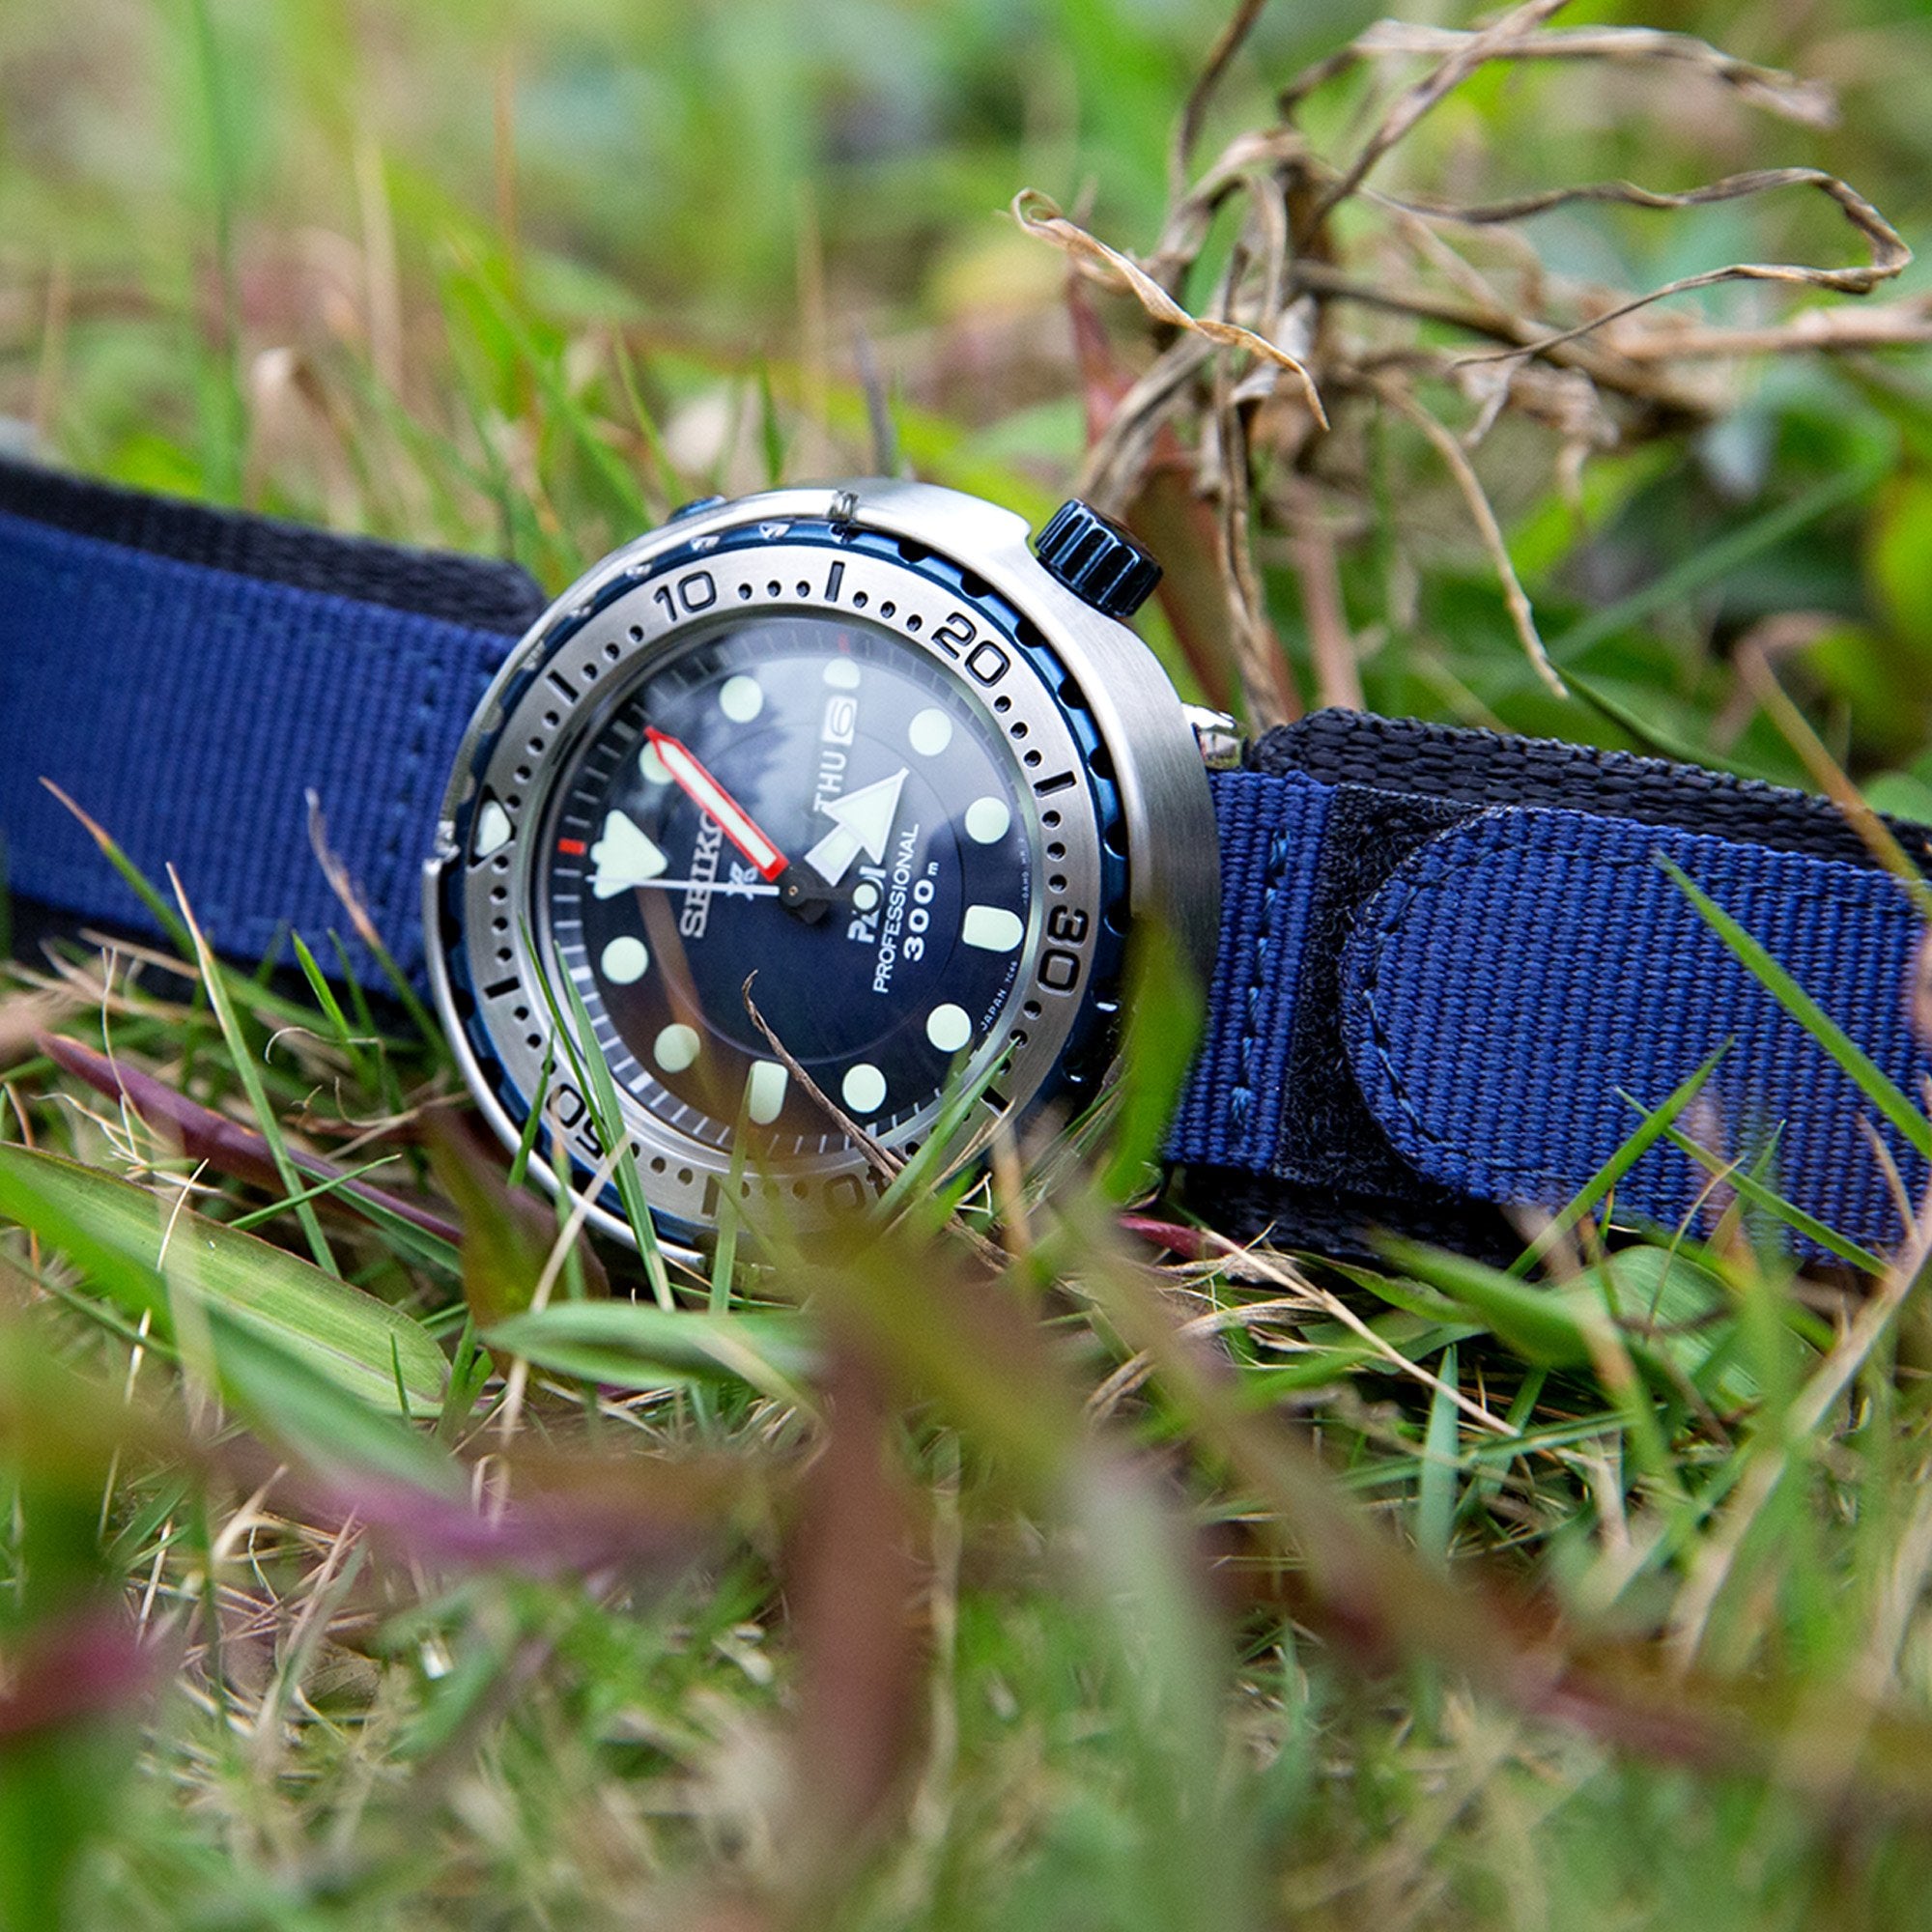 22mm MiLTAT Honeycomb Navy Blue Nylon Velcro Fastener Watch Strap Brushed Stainless Buckle Strapcode Watch Bands